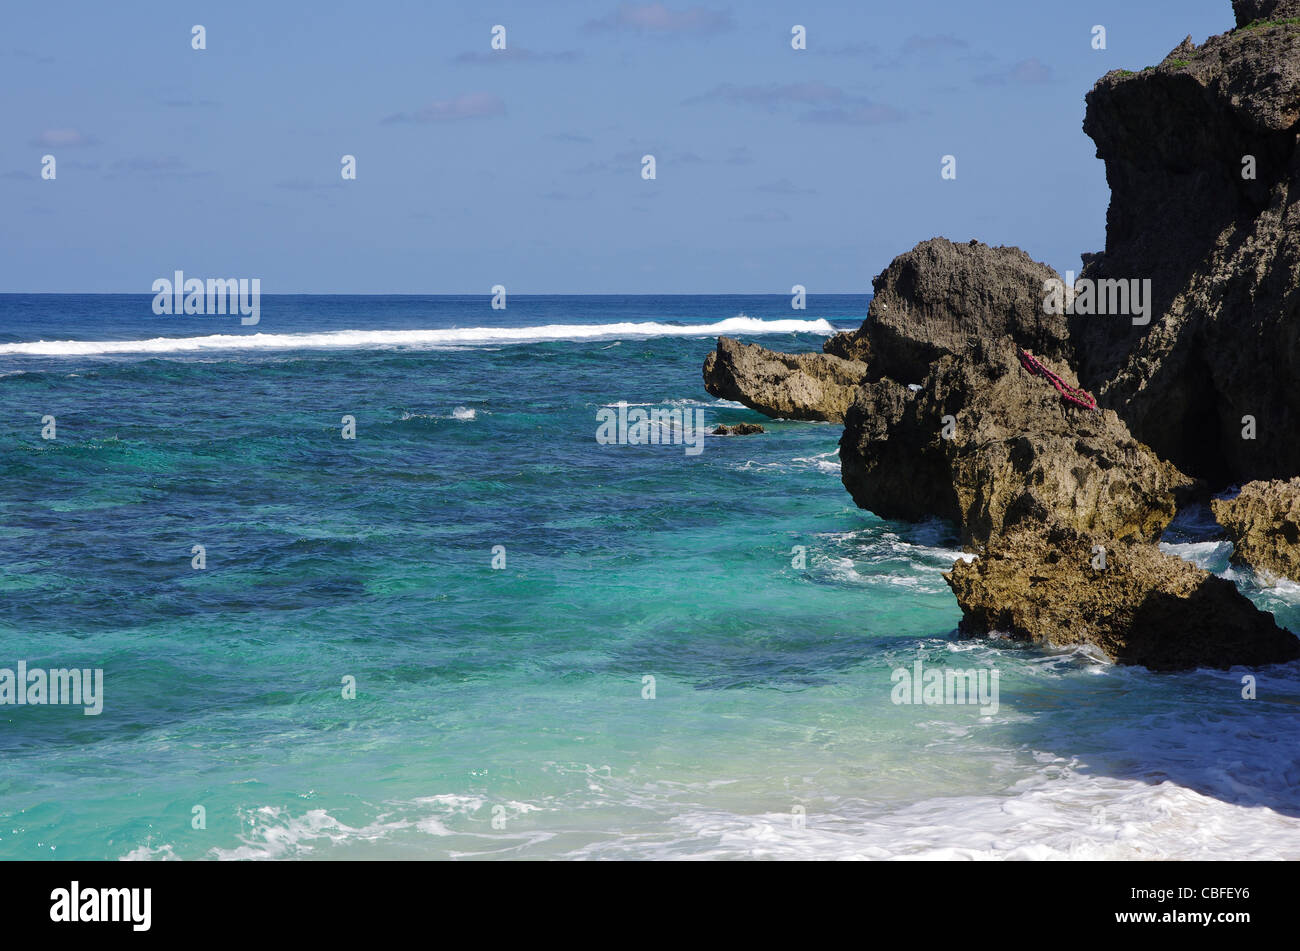 View from the Northern Coast across the turquoise sea out to the small coral reef on Yonaguni Island, Okinawa, Japan Stock Photo